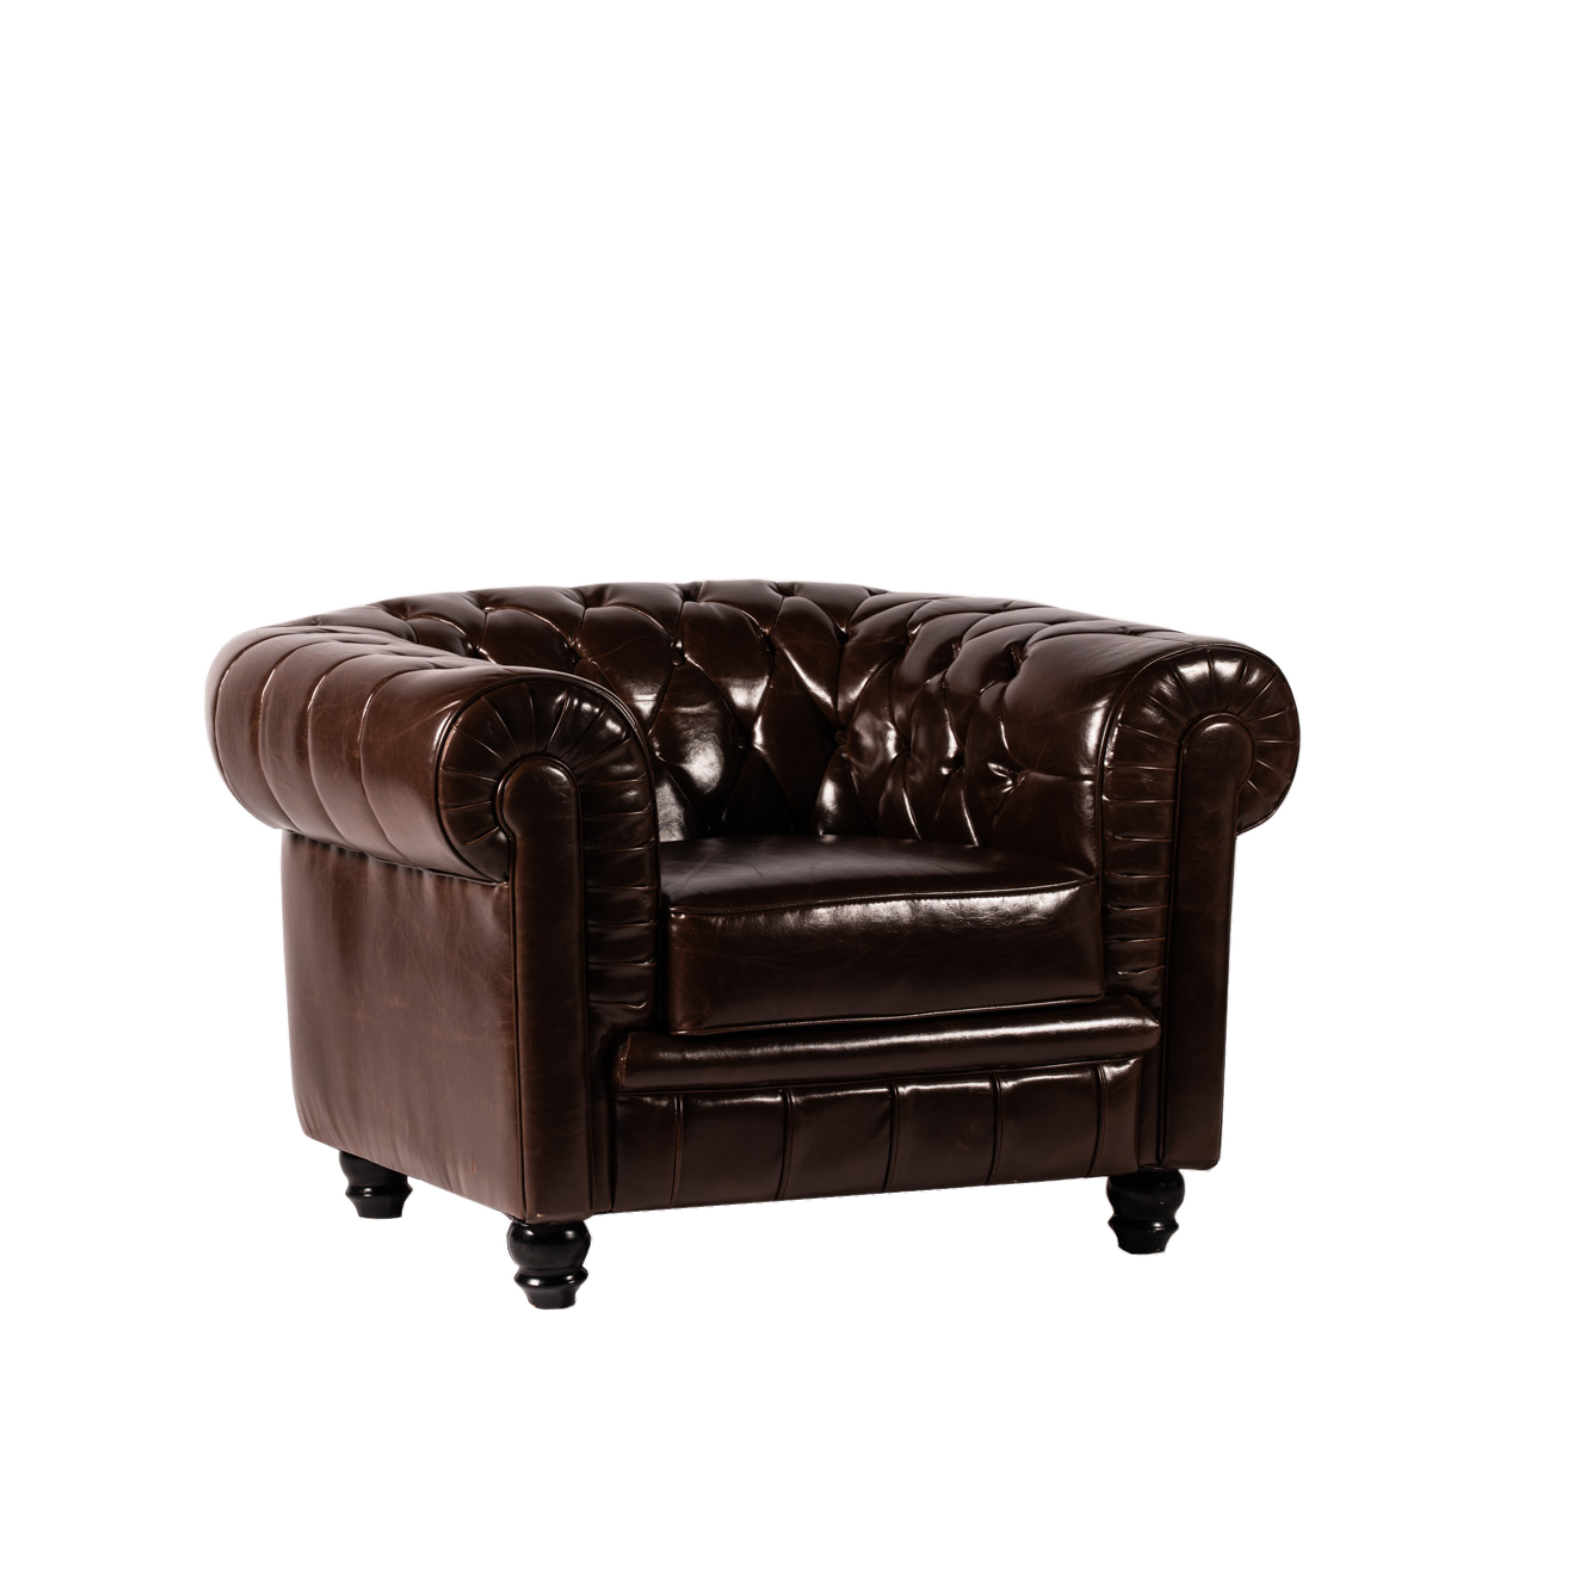 ARMCHAIR Vintage Leather Chesterfield 